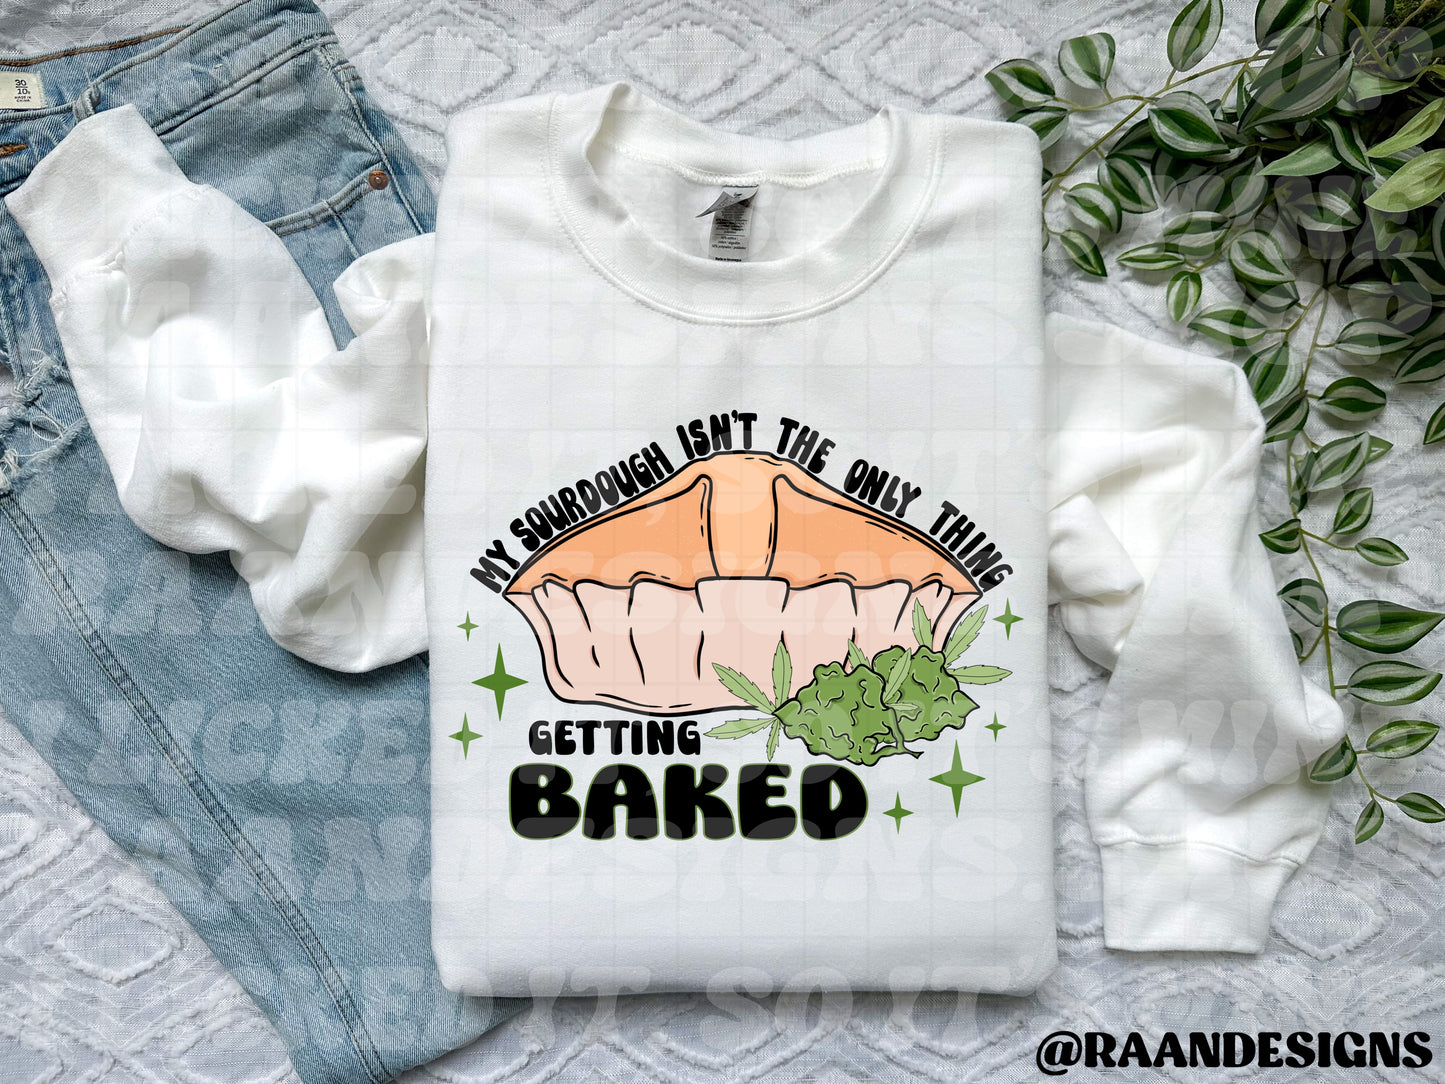 Sourdough Isn’t The Only Thing Getting Baked